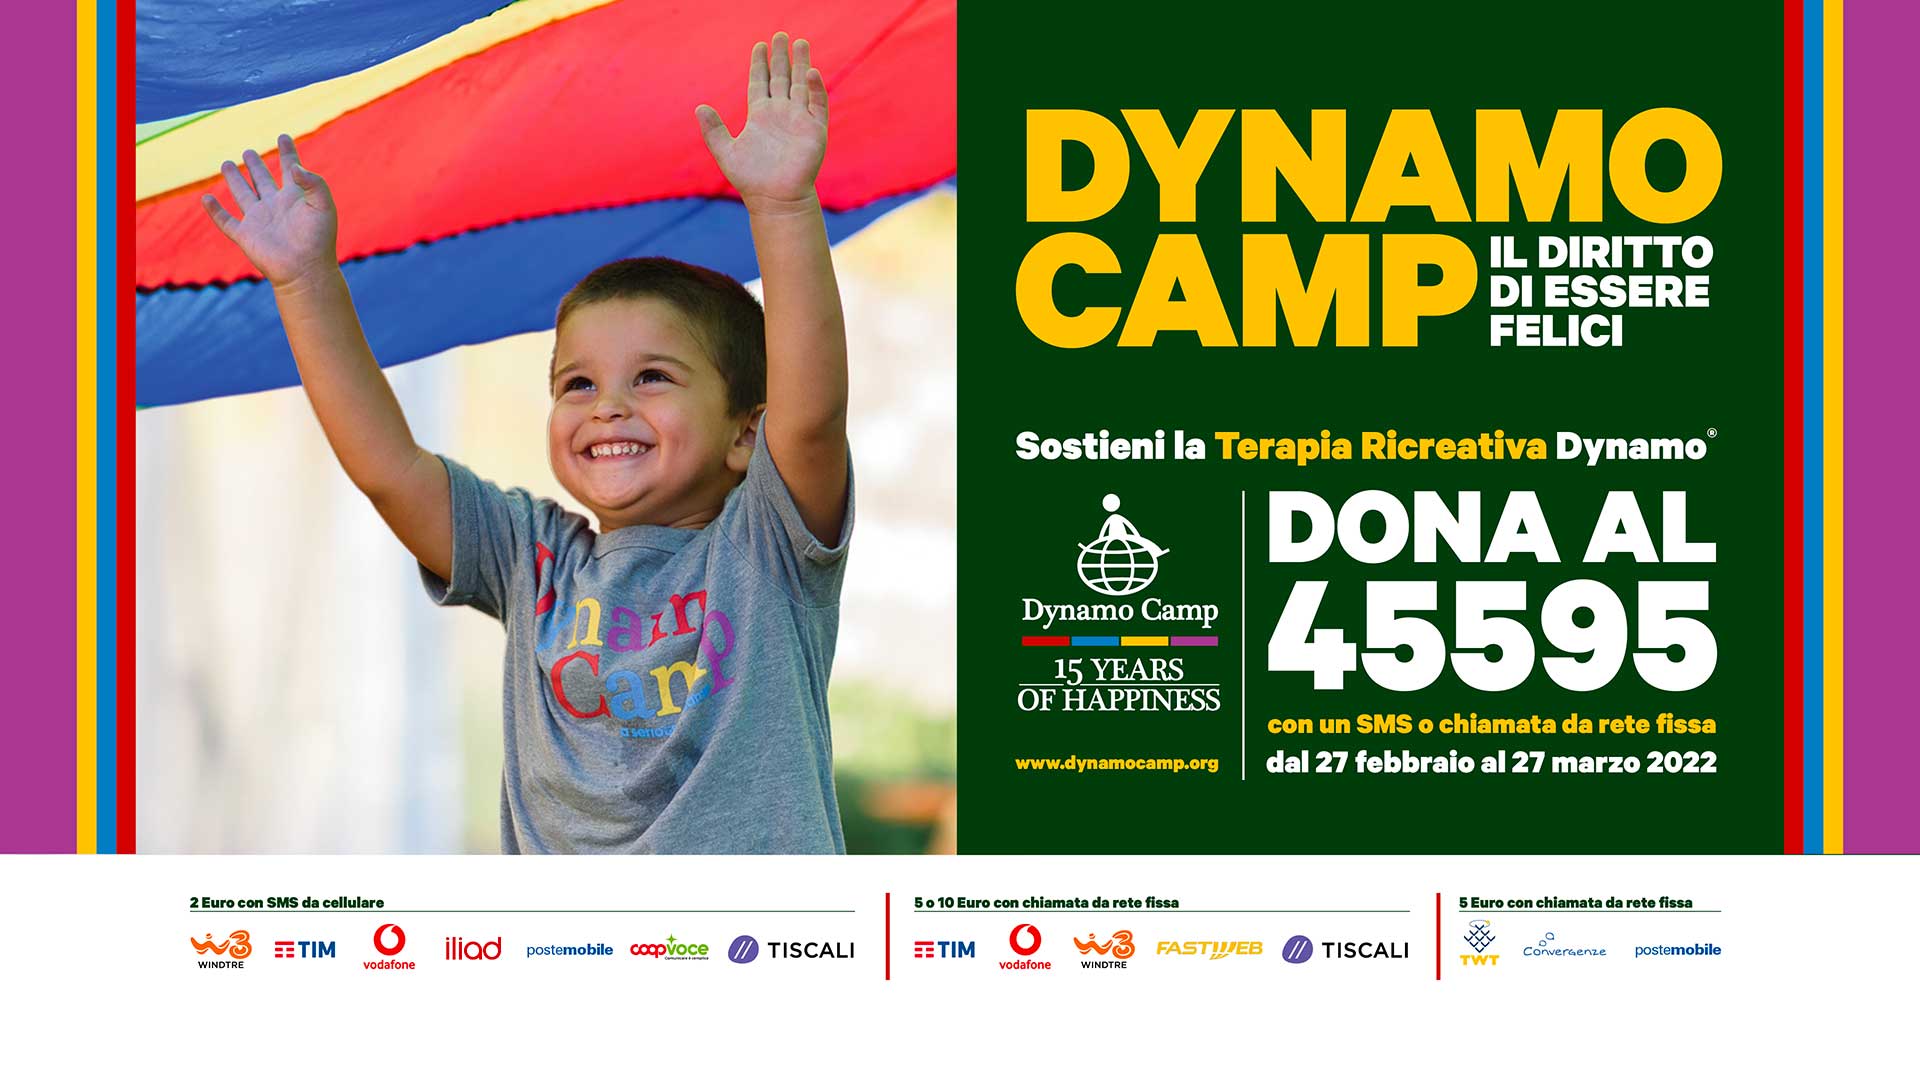 SMS solidale 45595 Dynamo Camp 2022